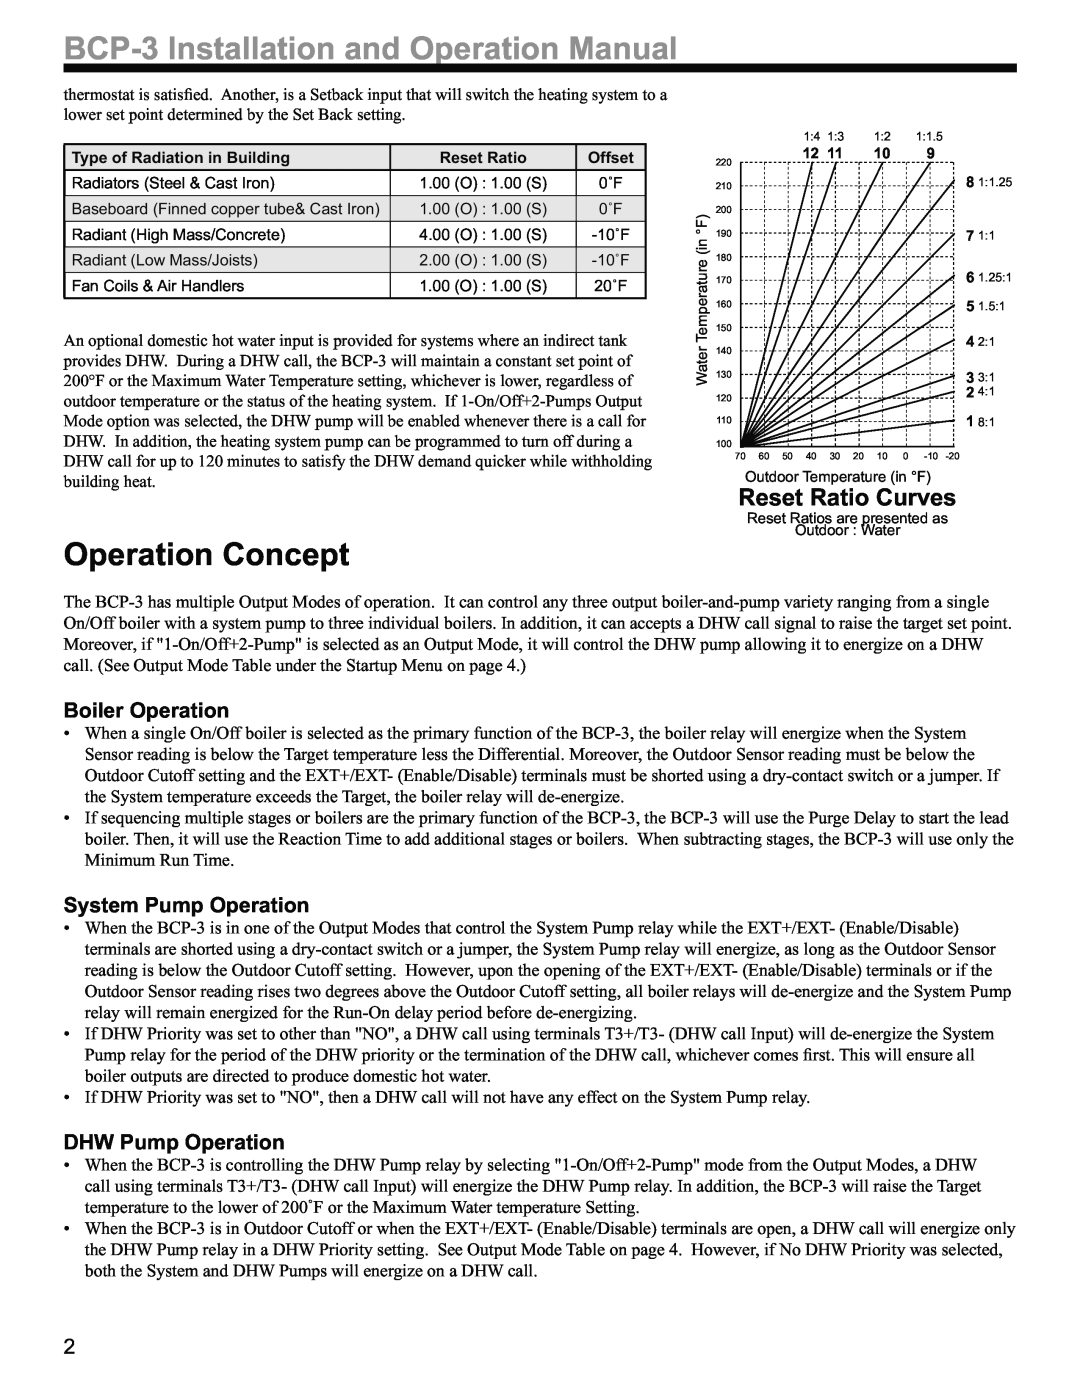 Weil-McLain BCP-3 manual Operation Concept, Reset Ratio Curves 